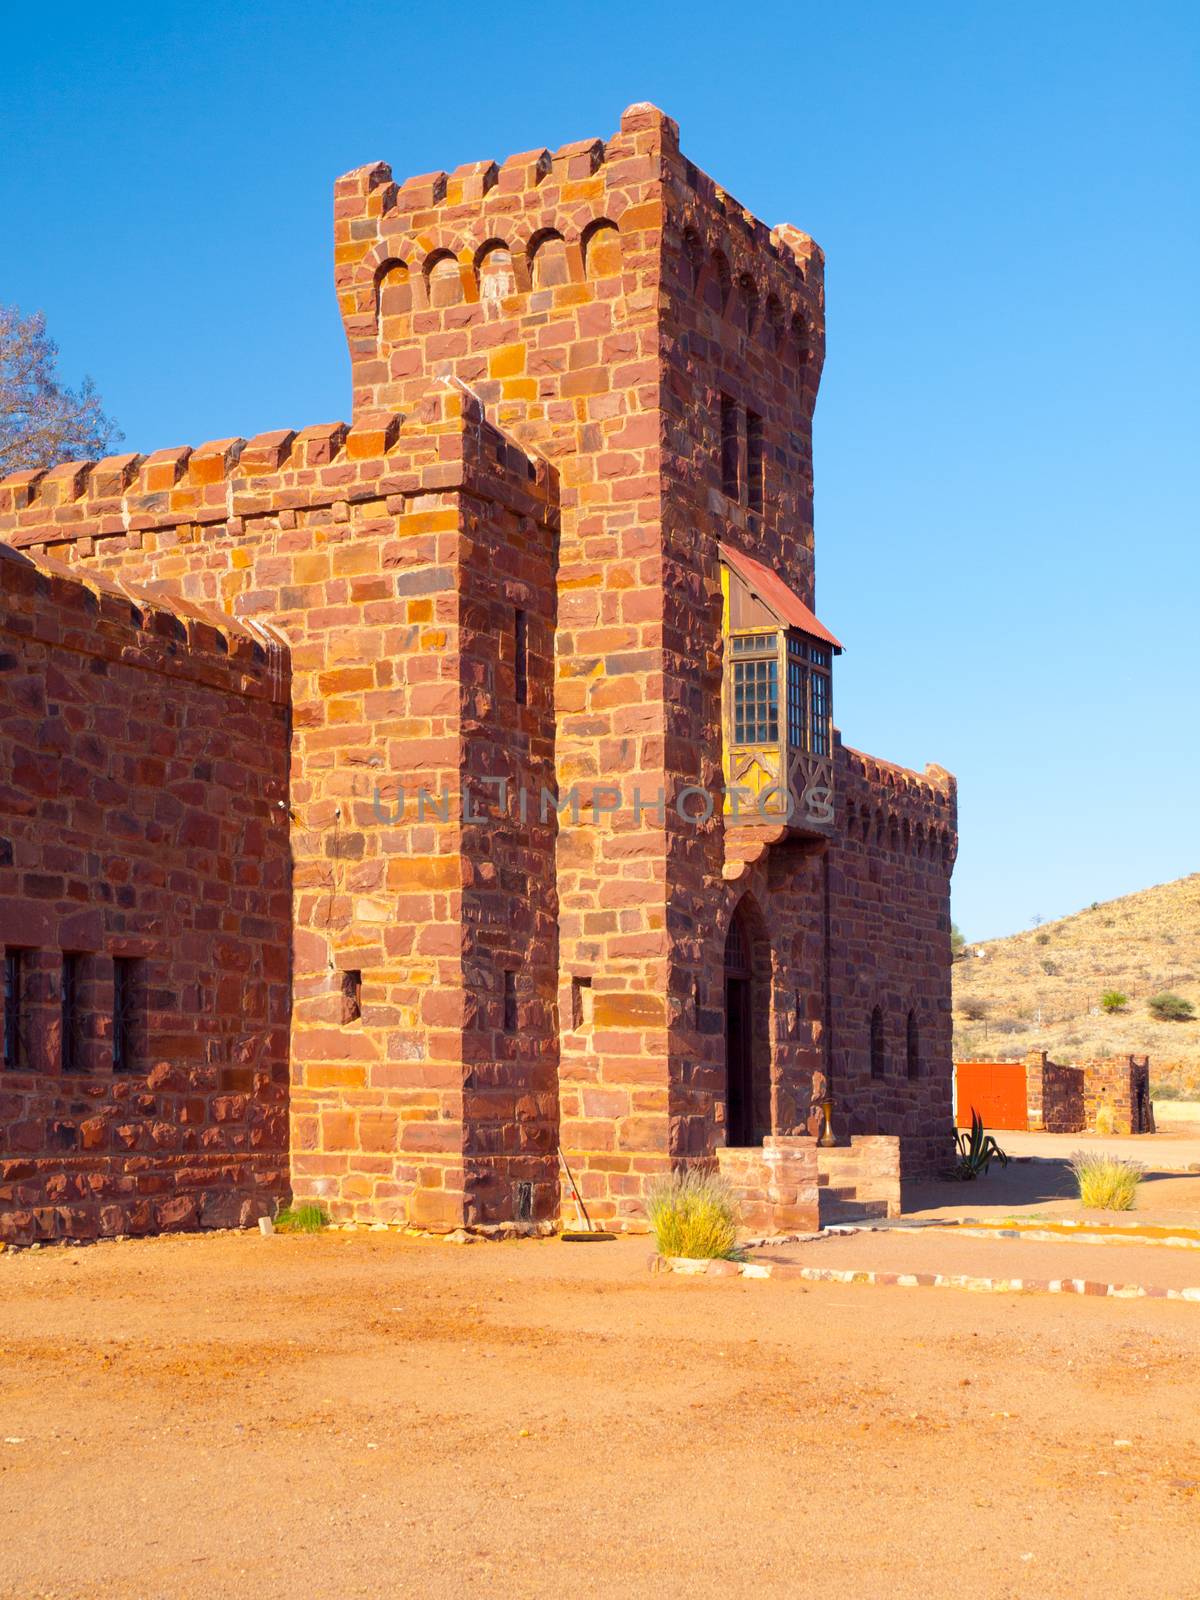 Duwisib castle. Pseudo-medieval fortress in southern Namibia, Africa.